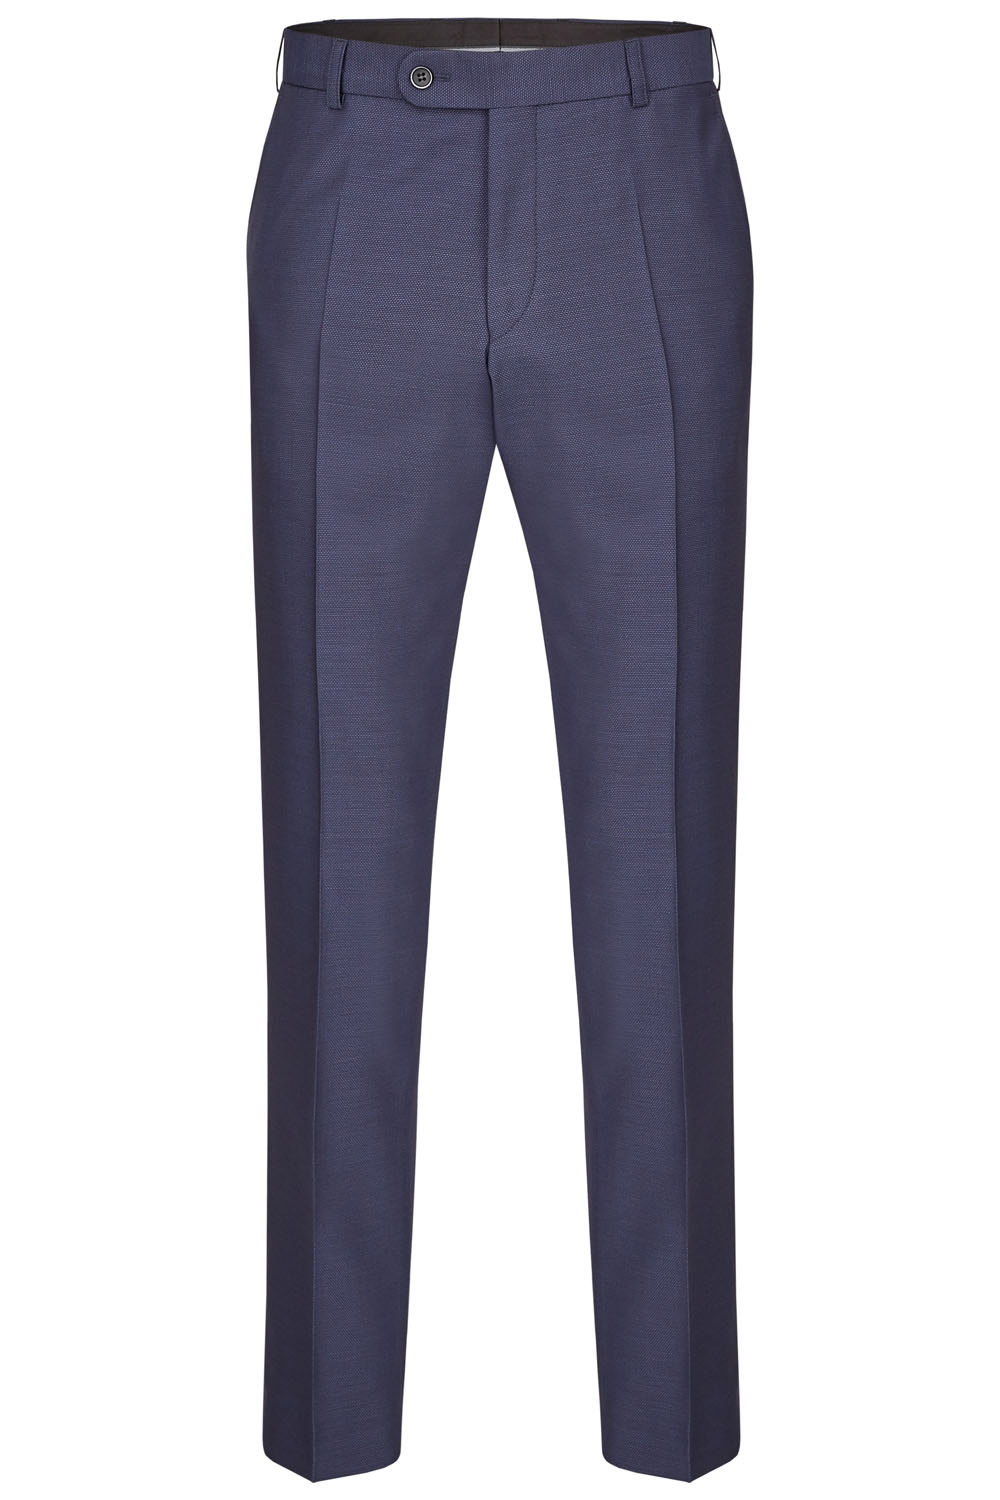 Blue 2 Piece Suit - Tom Murphy's Formal and Menswear